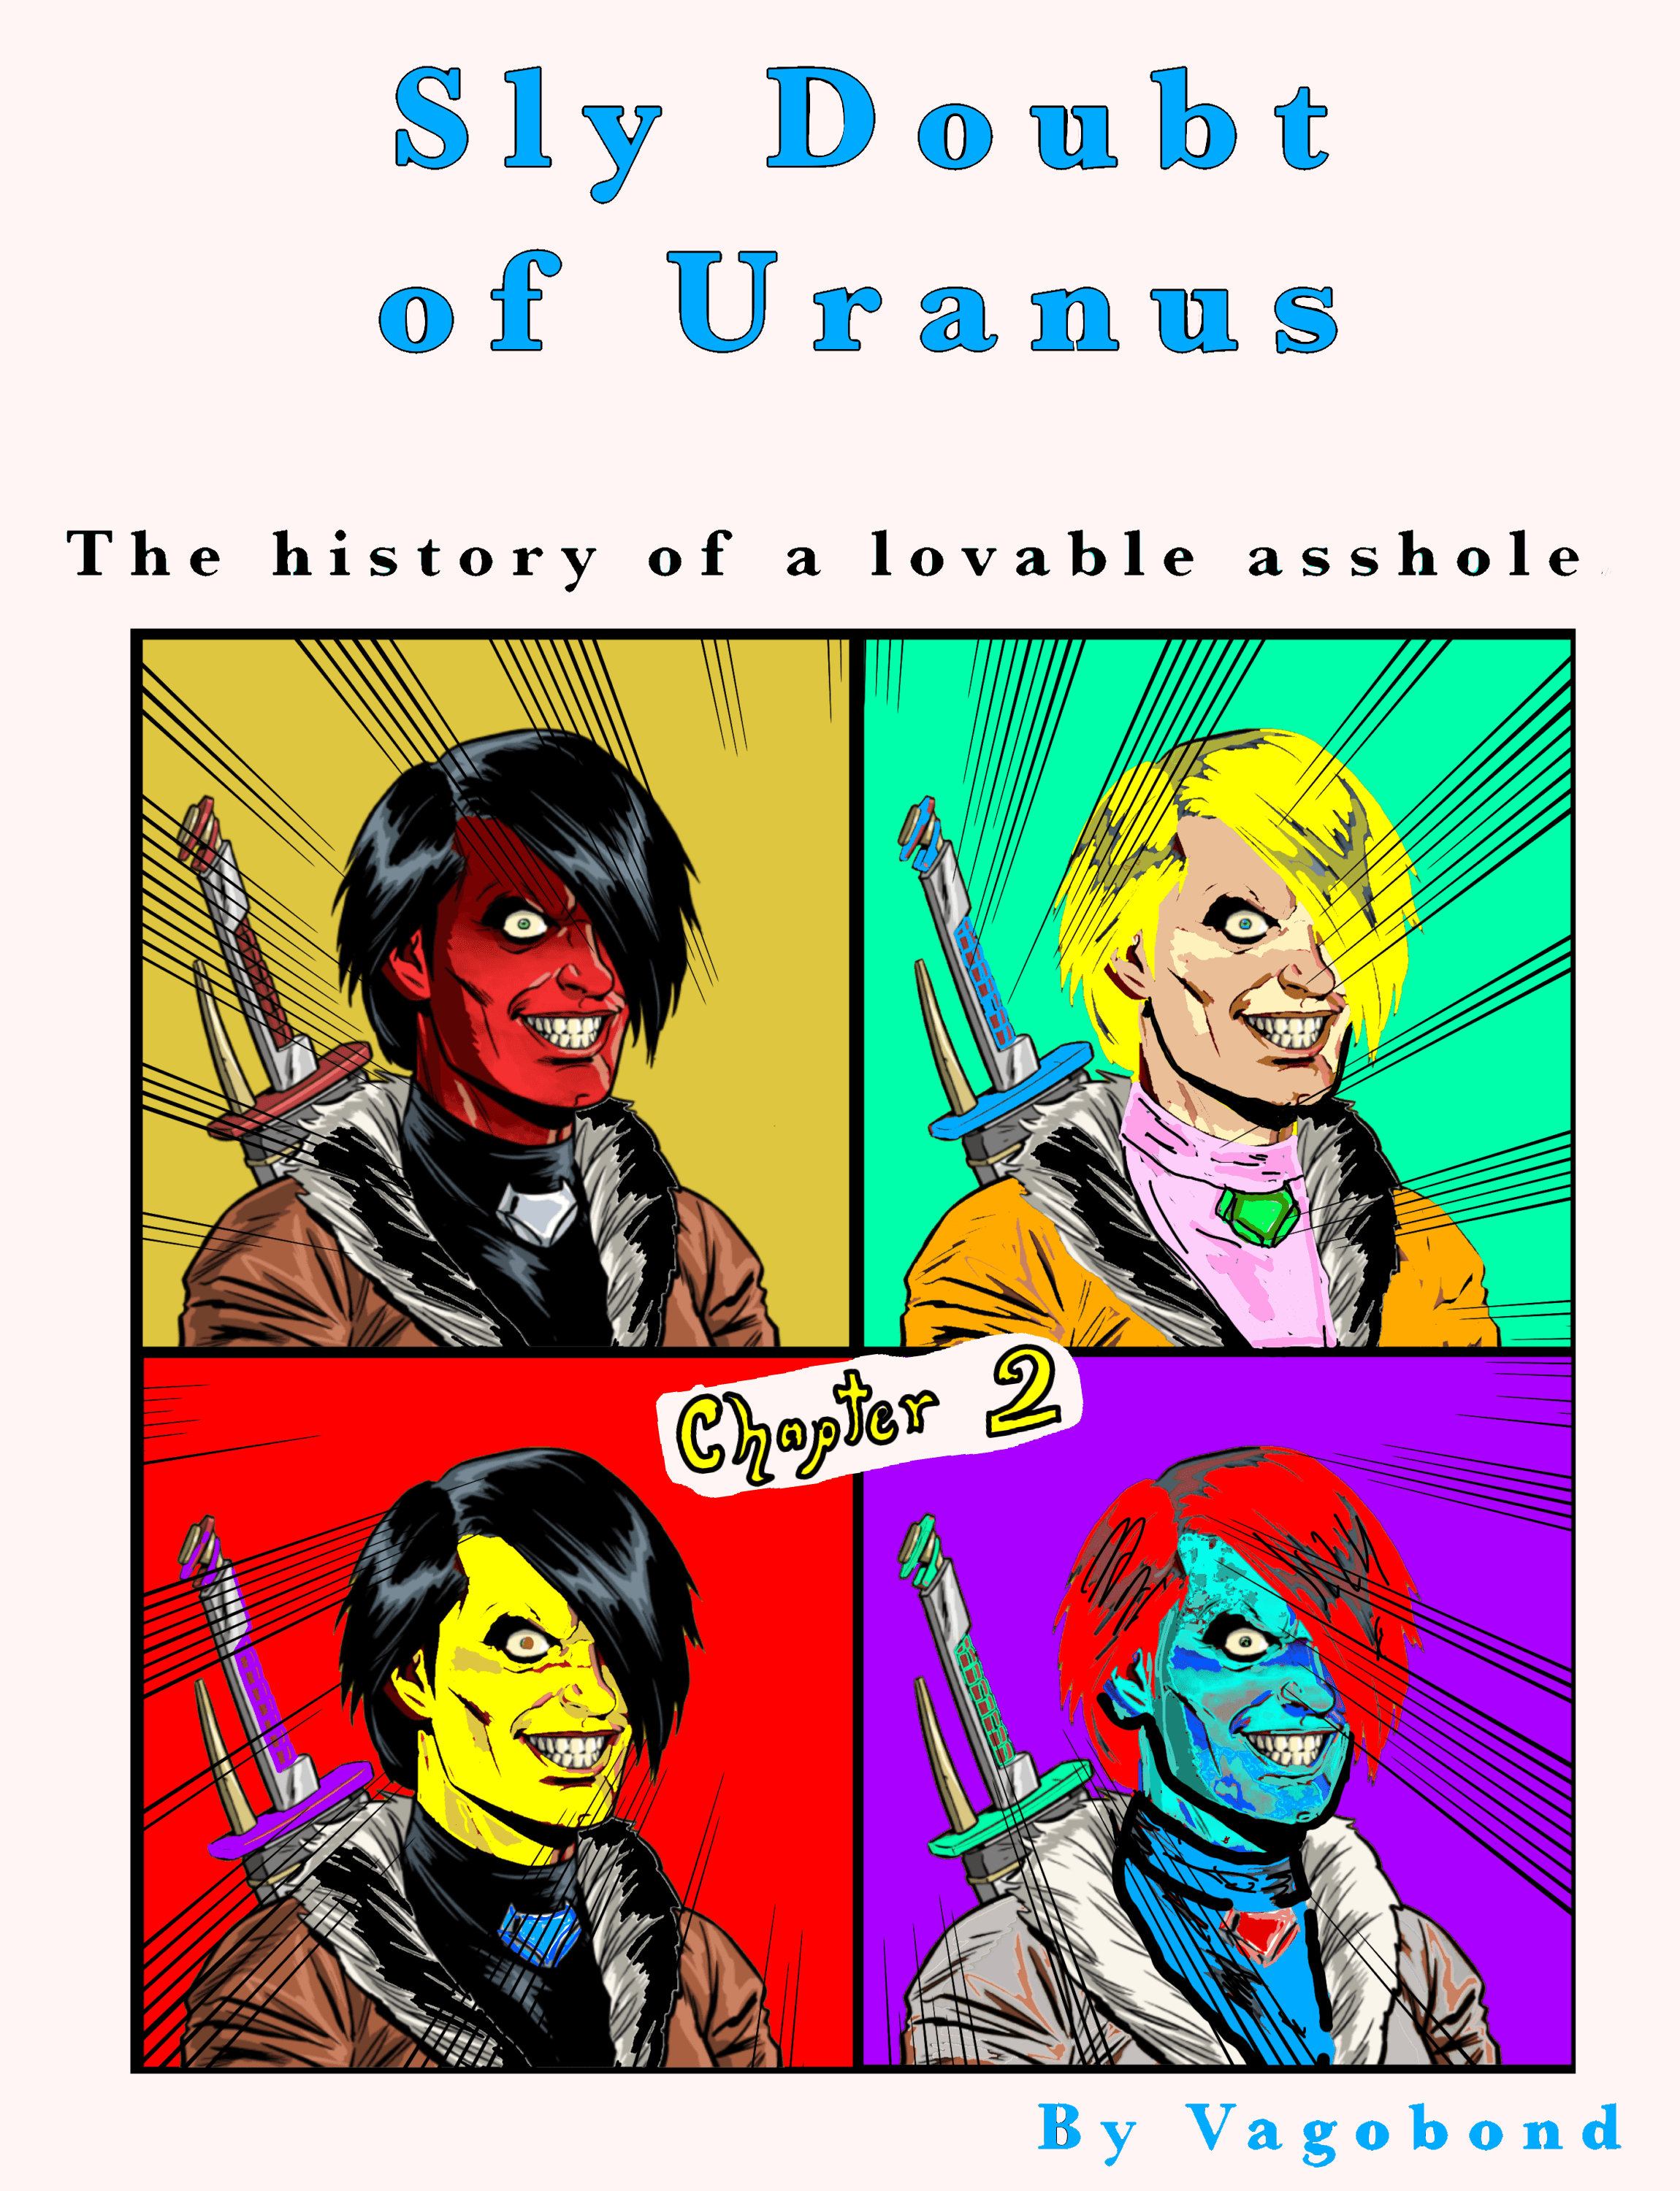 Sly Doubt of Uranus: The History of a Lovable Asshole - Chapter 2: Bloot Mines 1st Edition - 1st Printing